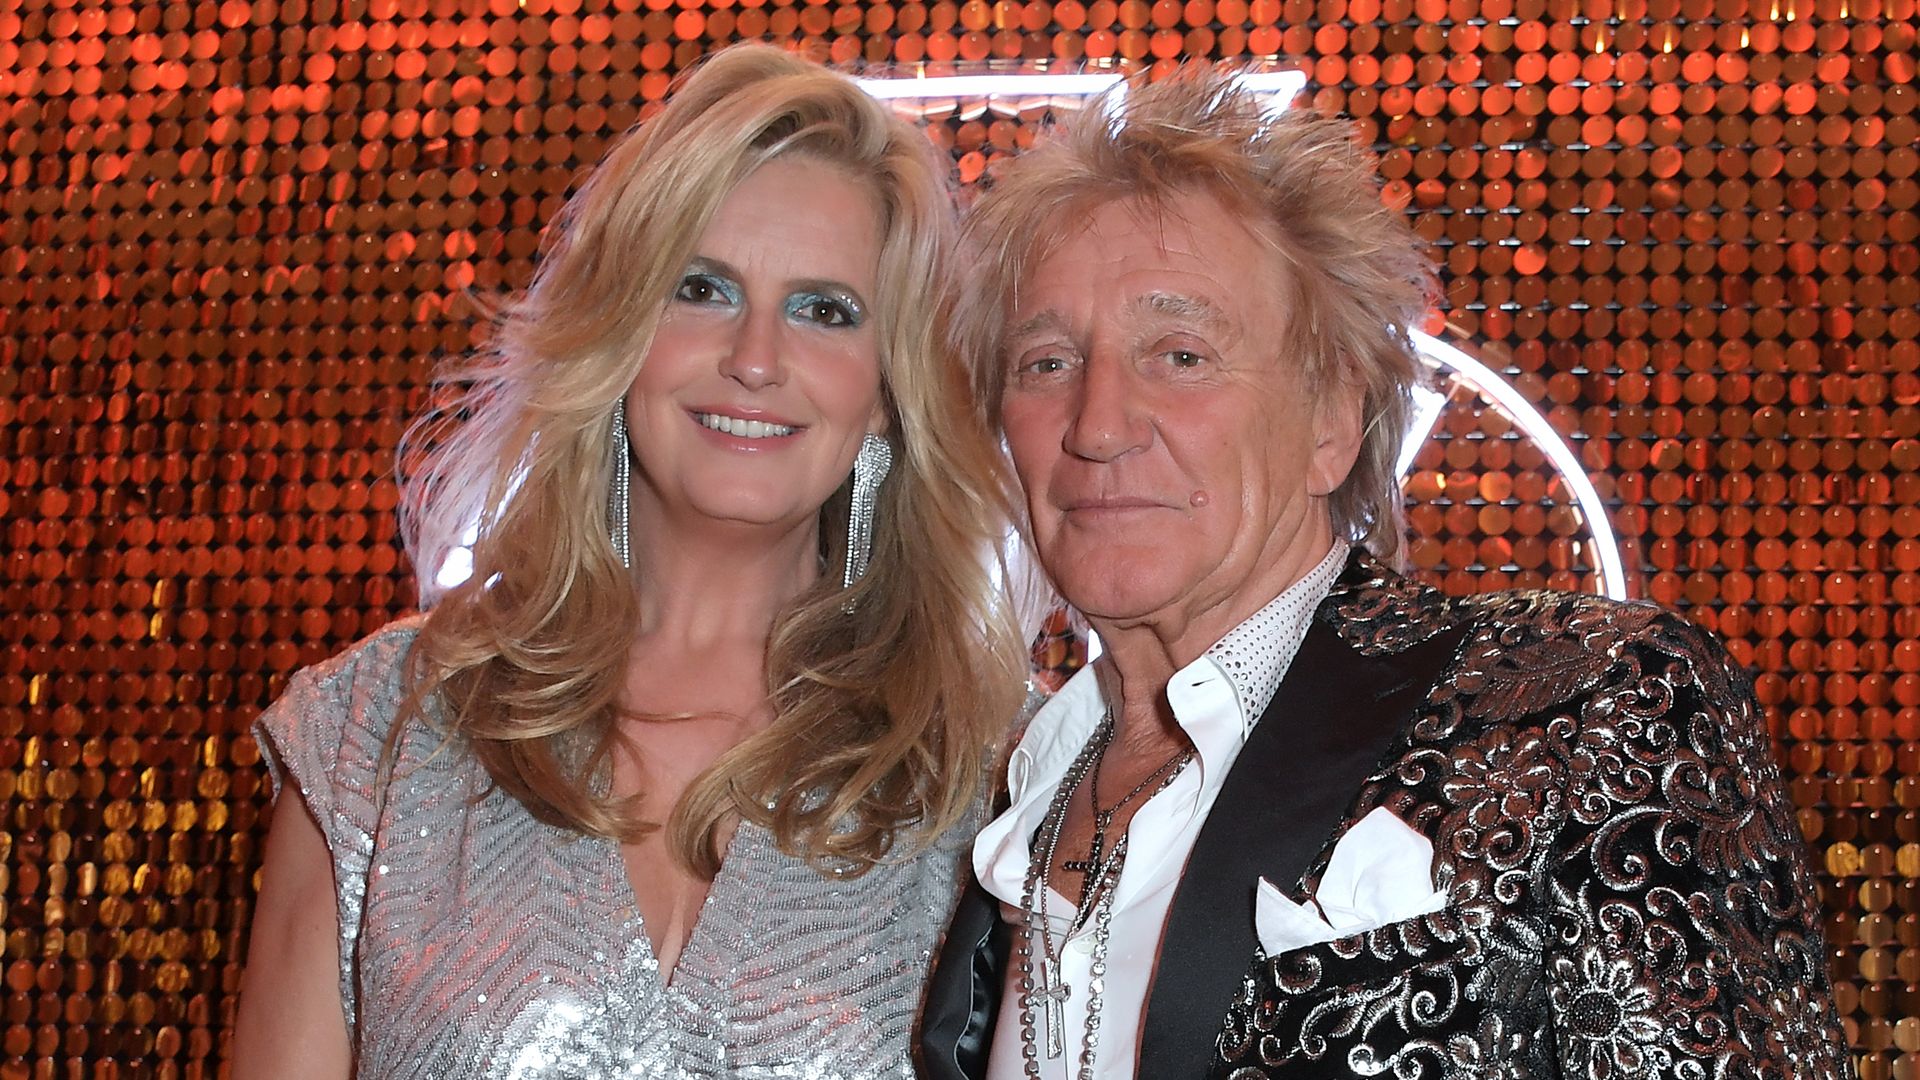 Penny Lancaster and Sir Rod Stewart in glitzy outfits